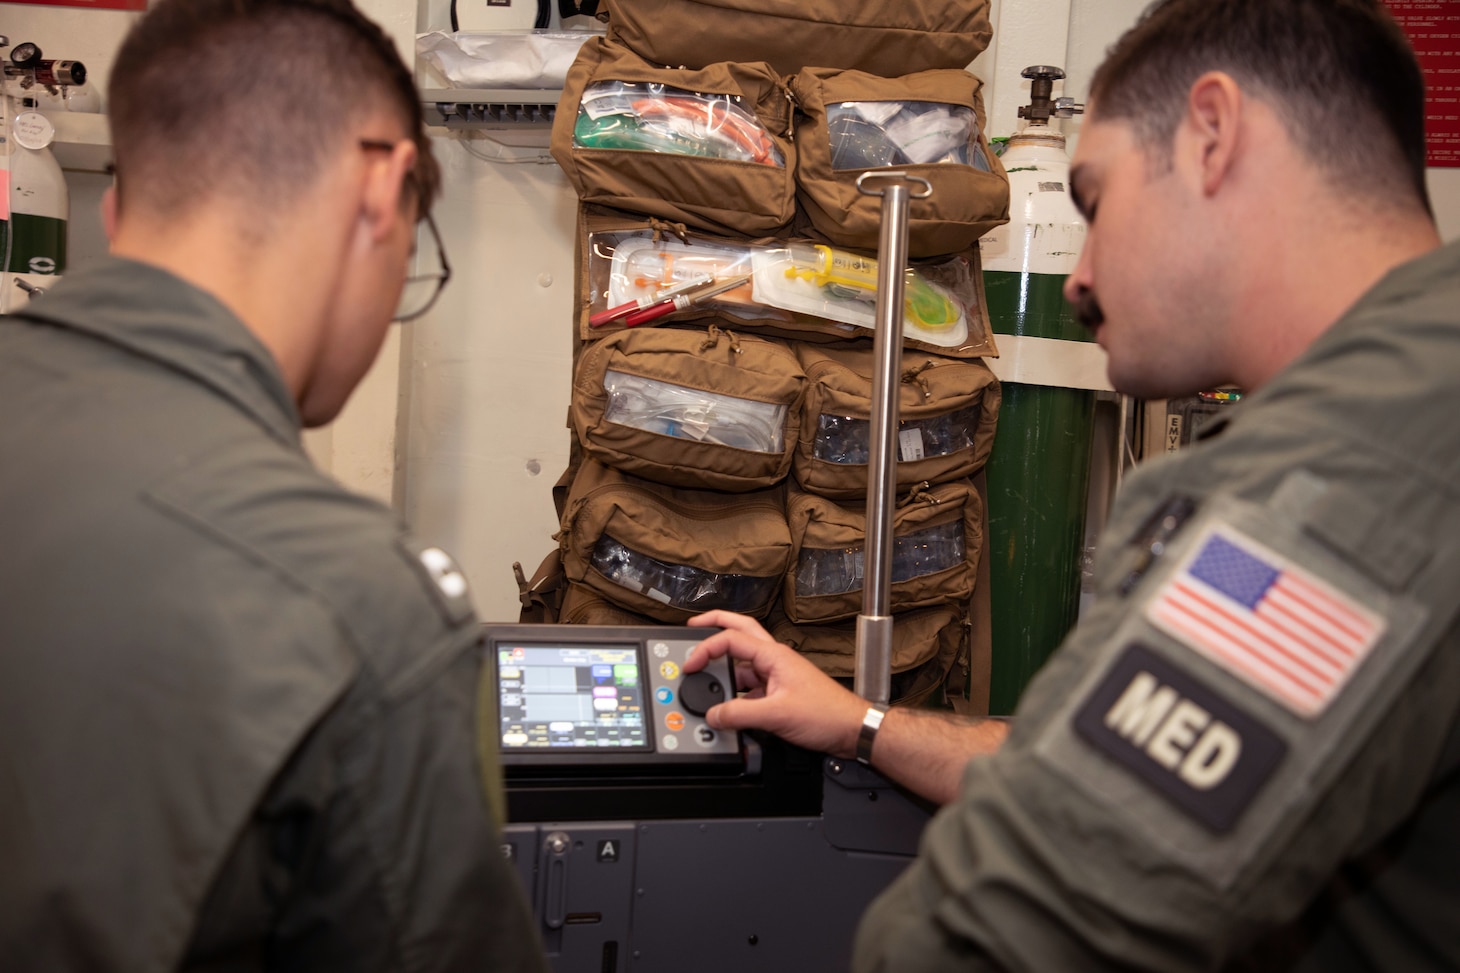 From left, Lt. Kyle Rowland, a critical care nurse assigned to Navy Medicine Readiness and Training Command (NMRTC) Camp Lejeune, and Hospital Corpsman 2nd Class Bradley Christian, a search and rescue medical technician assigned to NMRTC Patuxent River, test an integrated intensive care mobile unit during inventory in the medical department aboard Nimitz-class aircraft carrier USS Dwight D. Eisenhower (CVN 69).